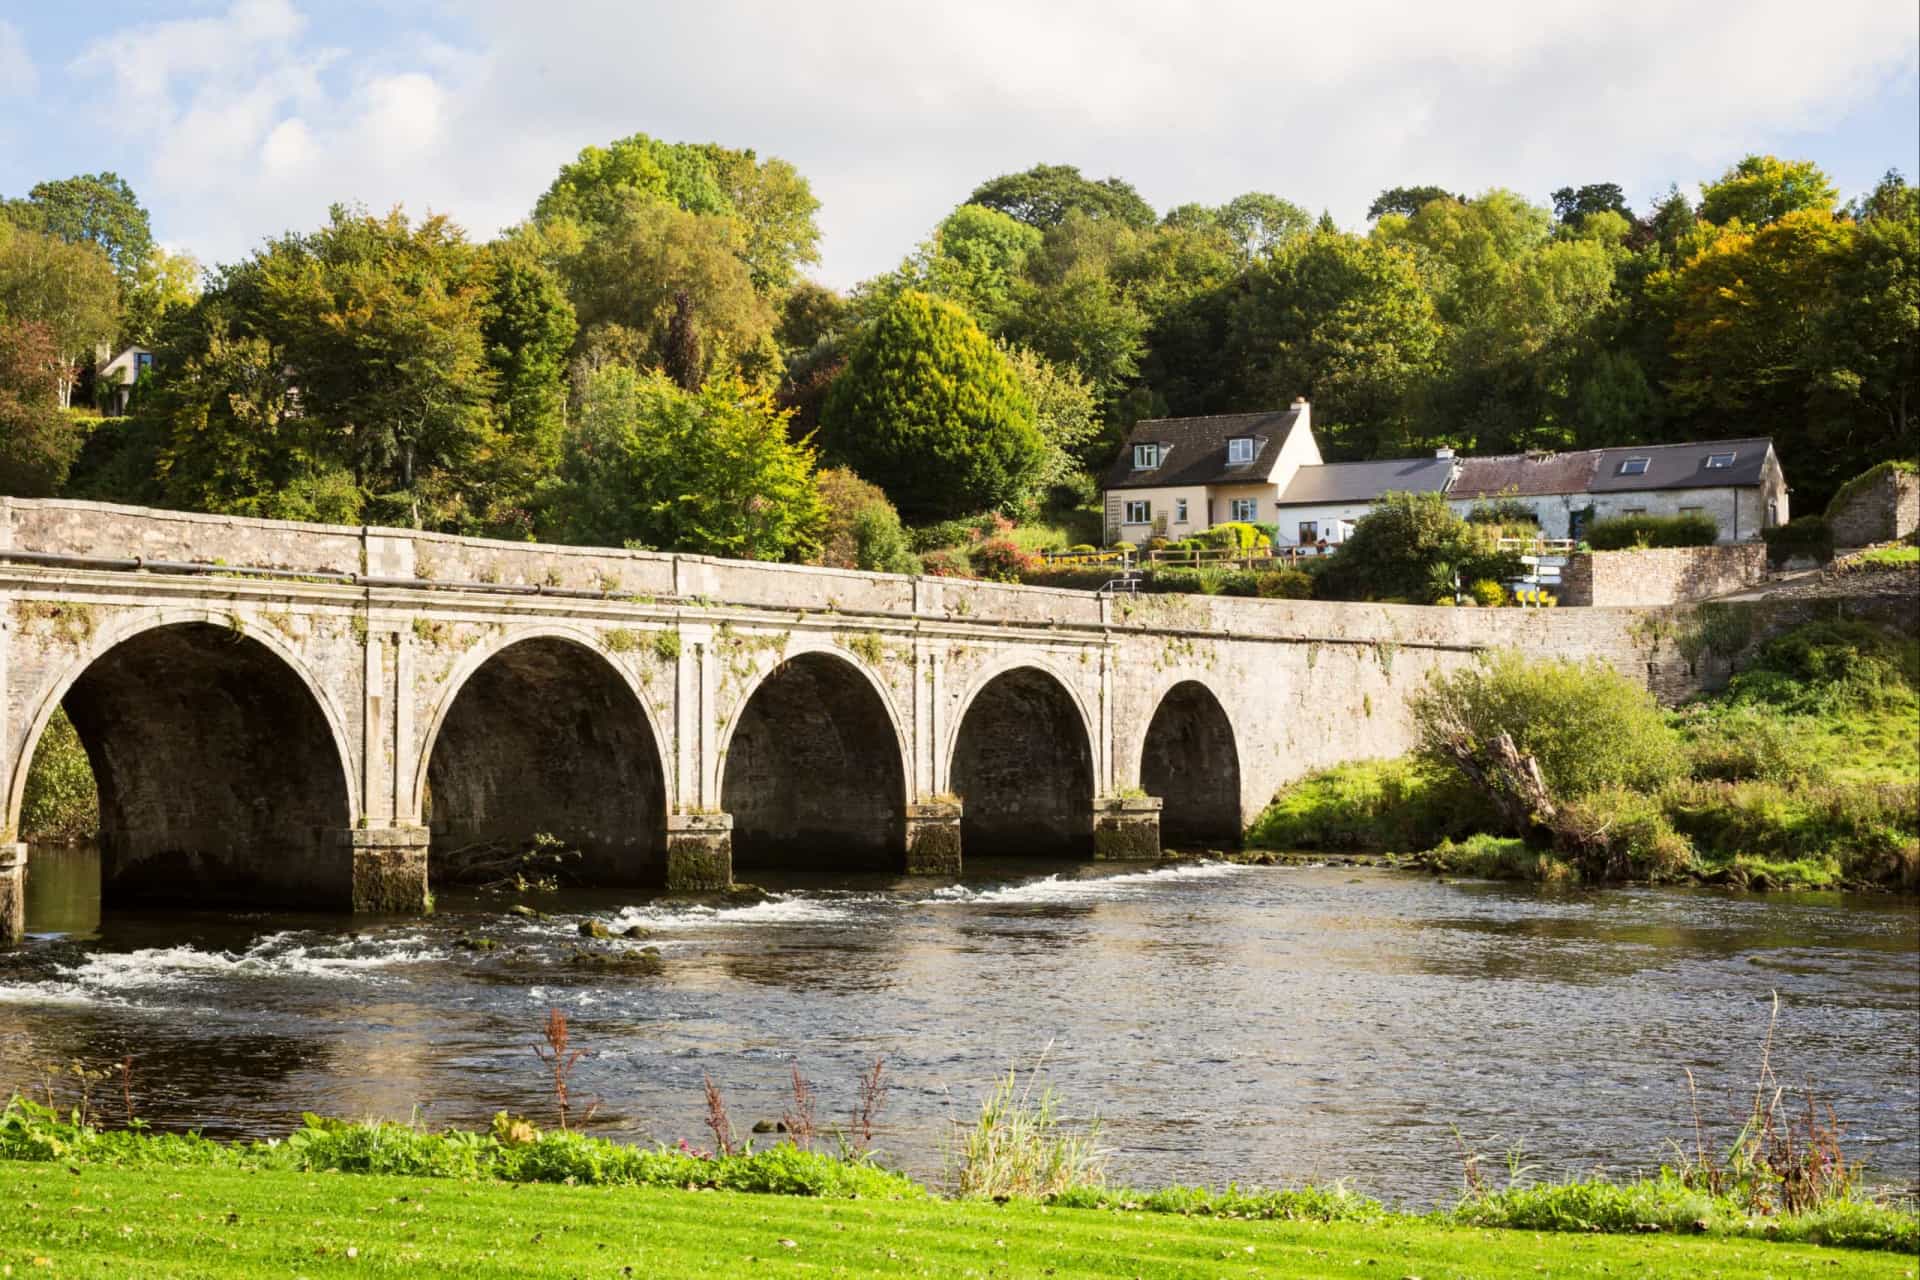 <p>The pretty village of Inistioge is entered by crossing a 10 arch stone bridge over the Nore river. The Woodstock Estate, with its derelict Georgian house, is open to the public.</p>